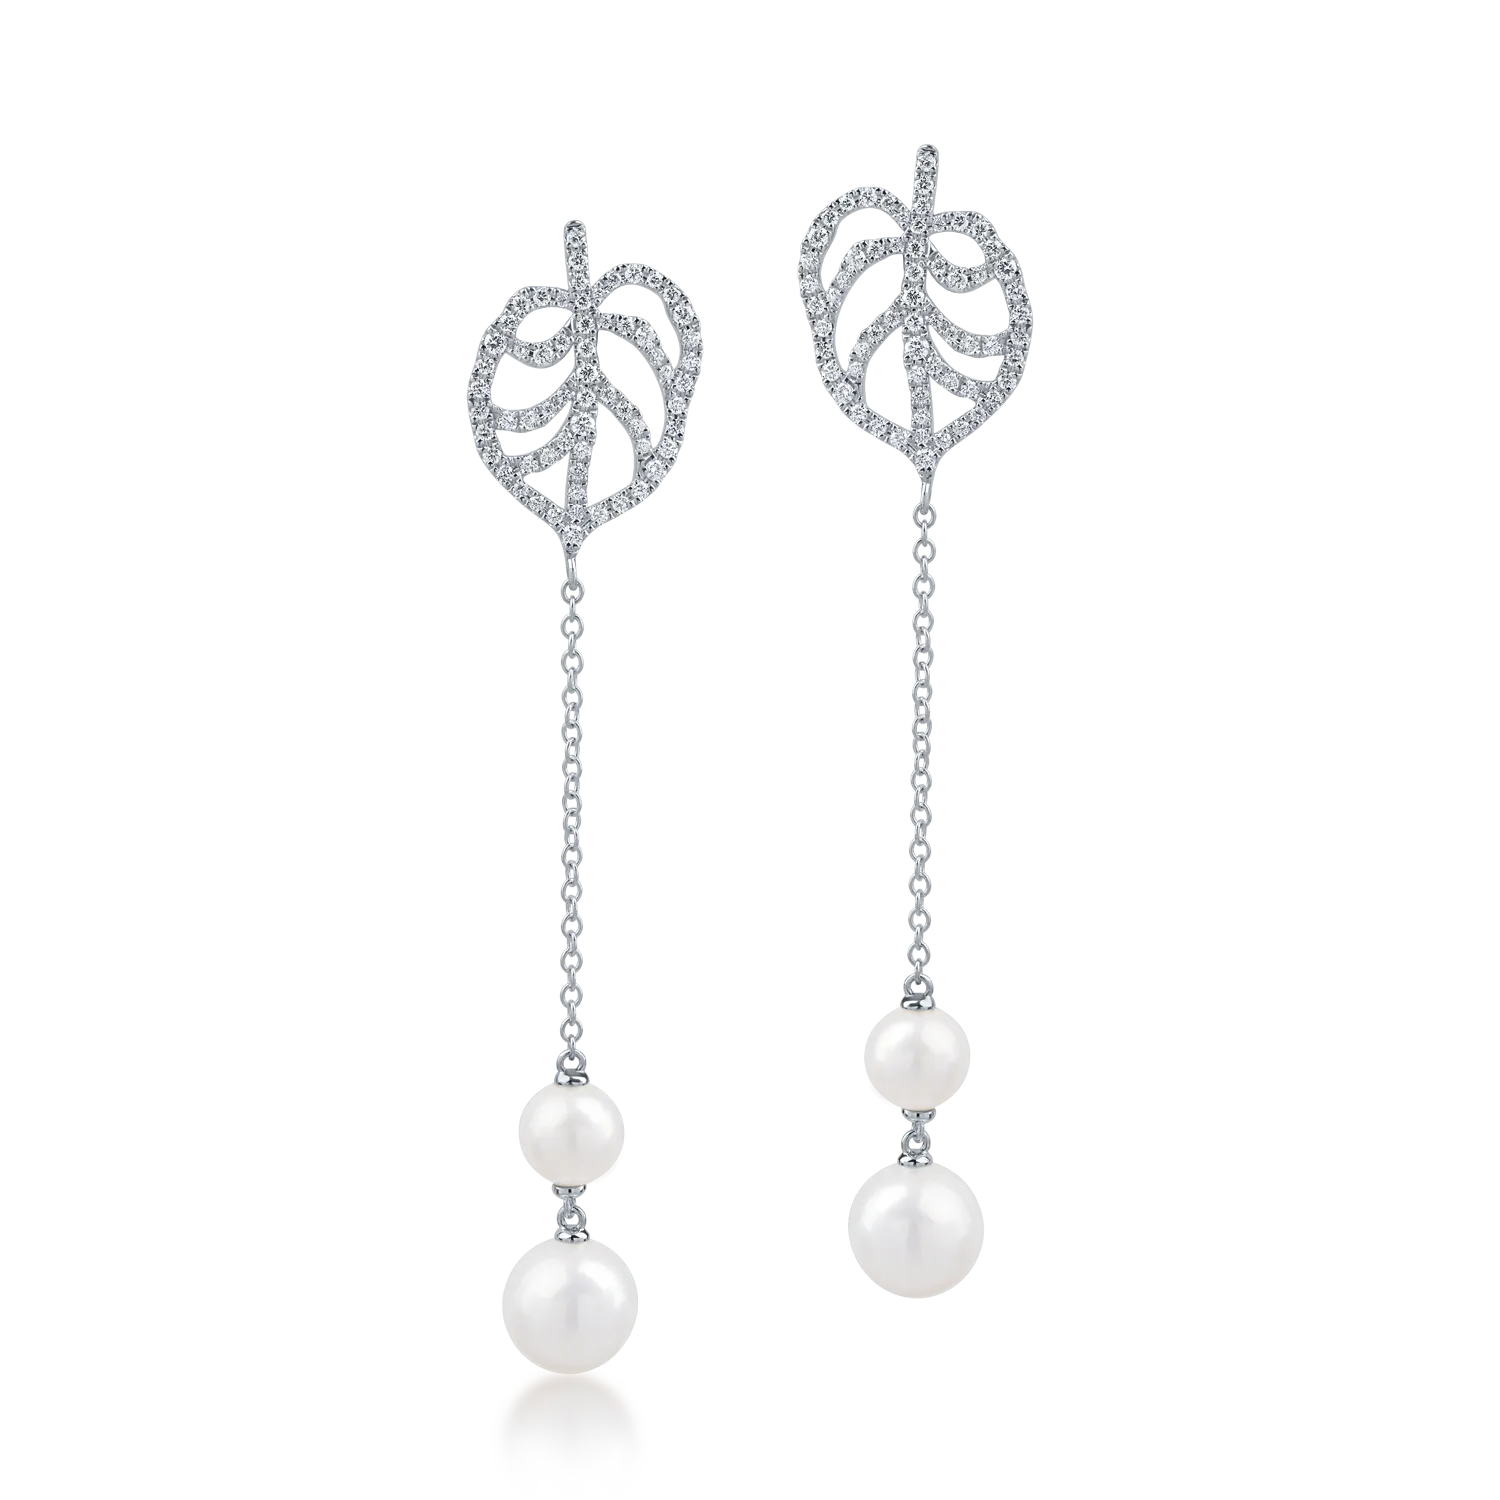 White gold earrings with 11.51ct fresh water pearls and 0.67ct diamonds